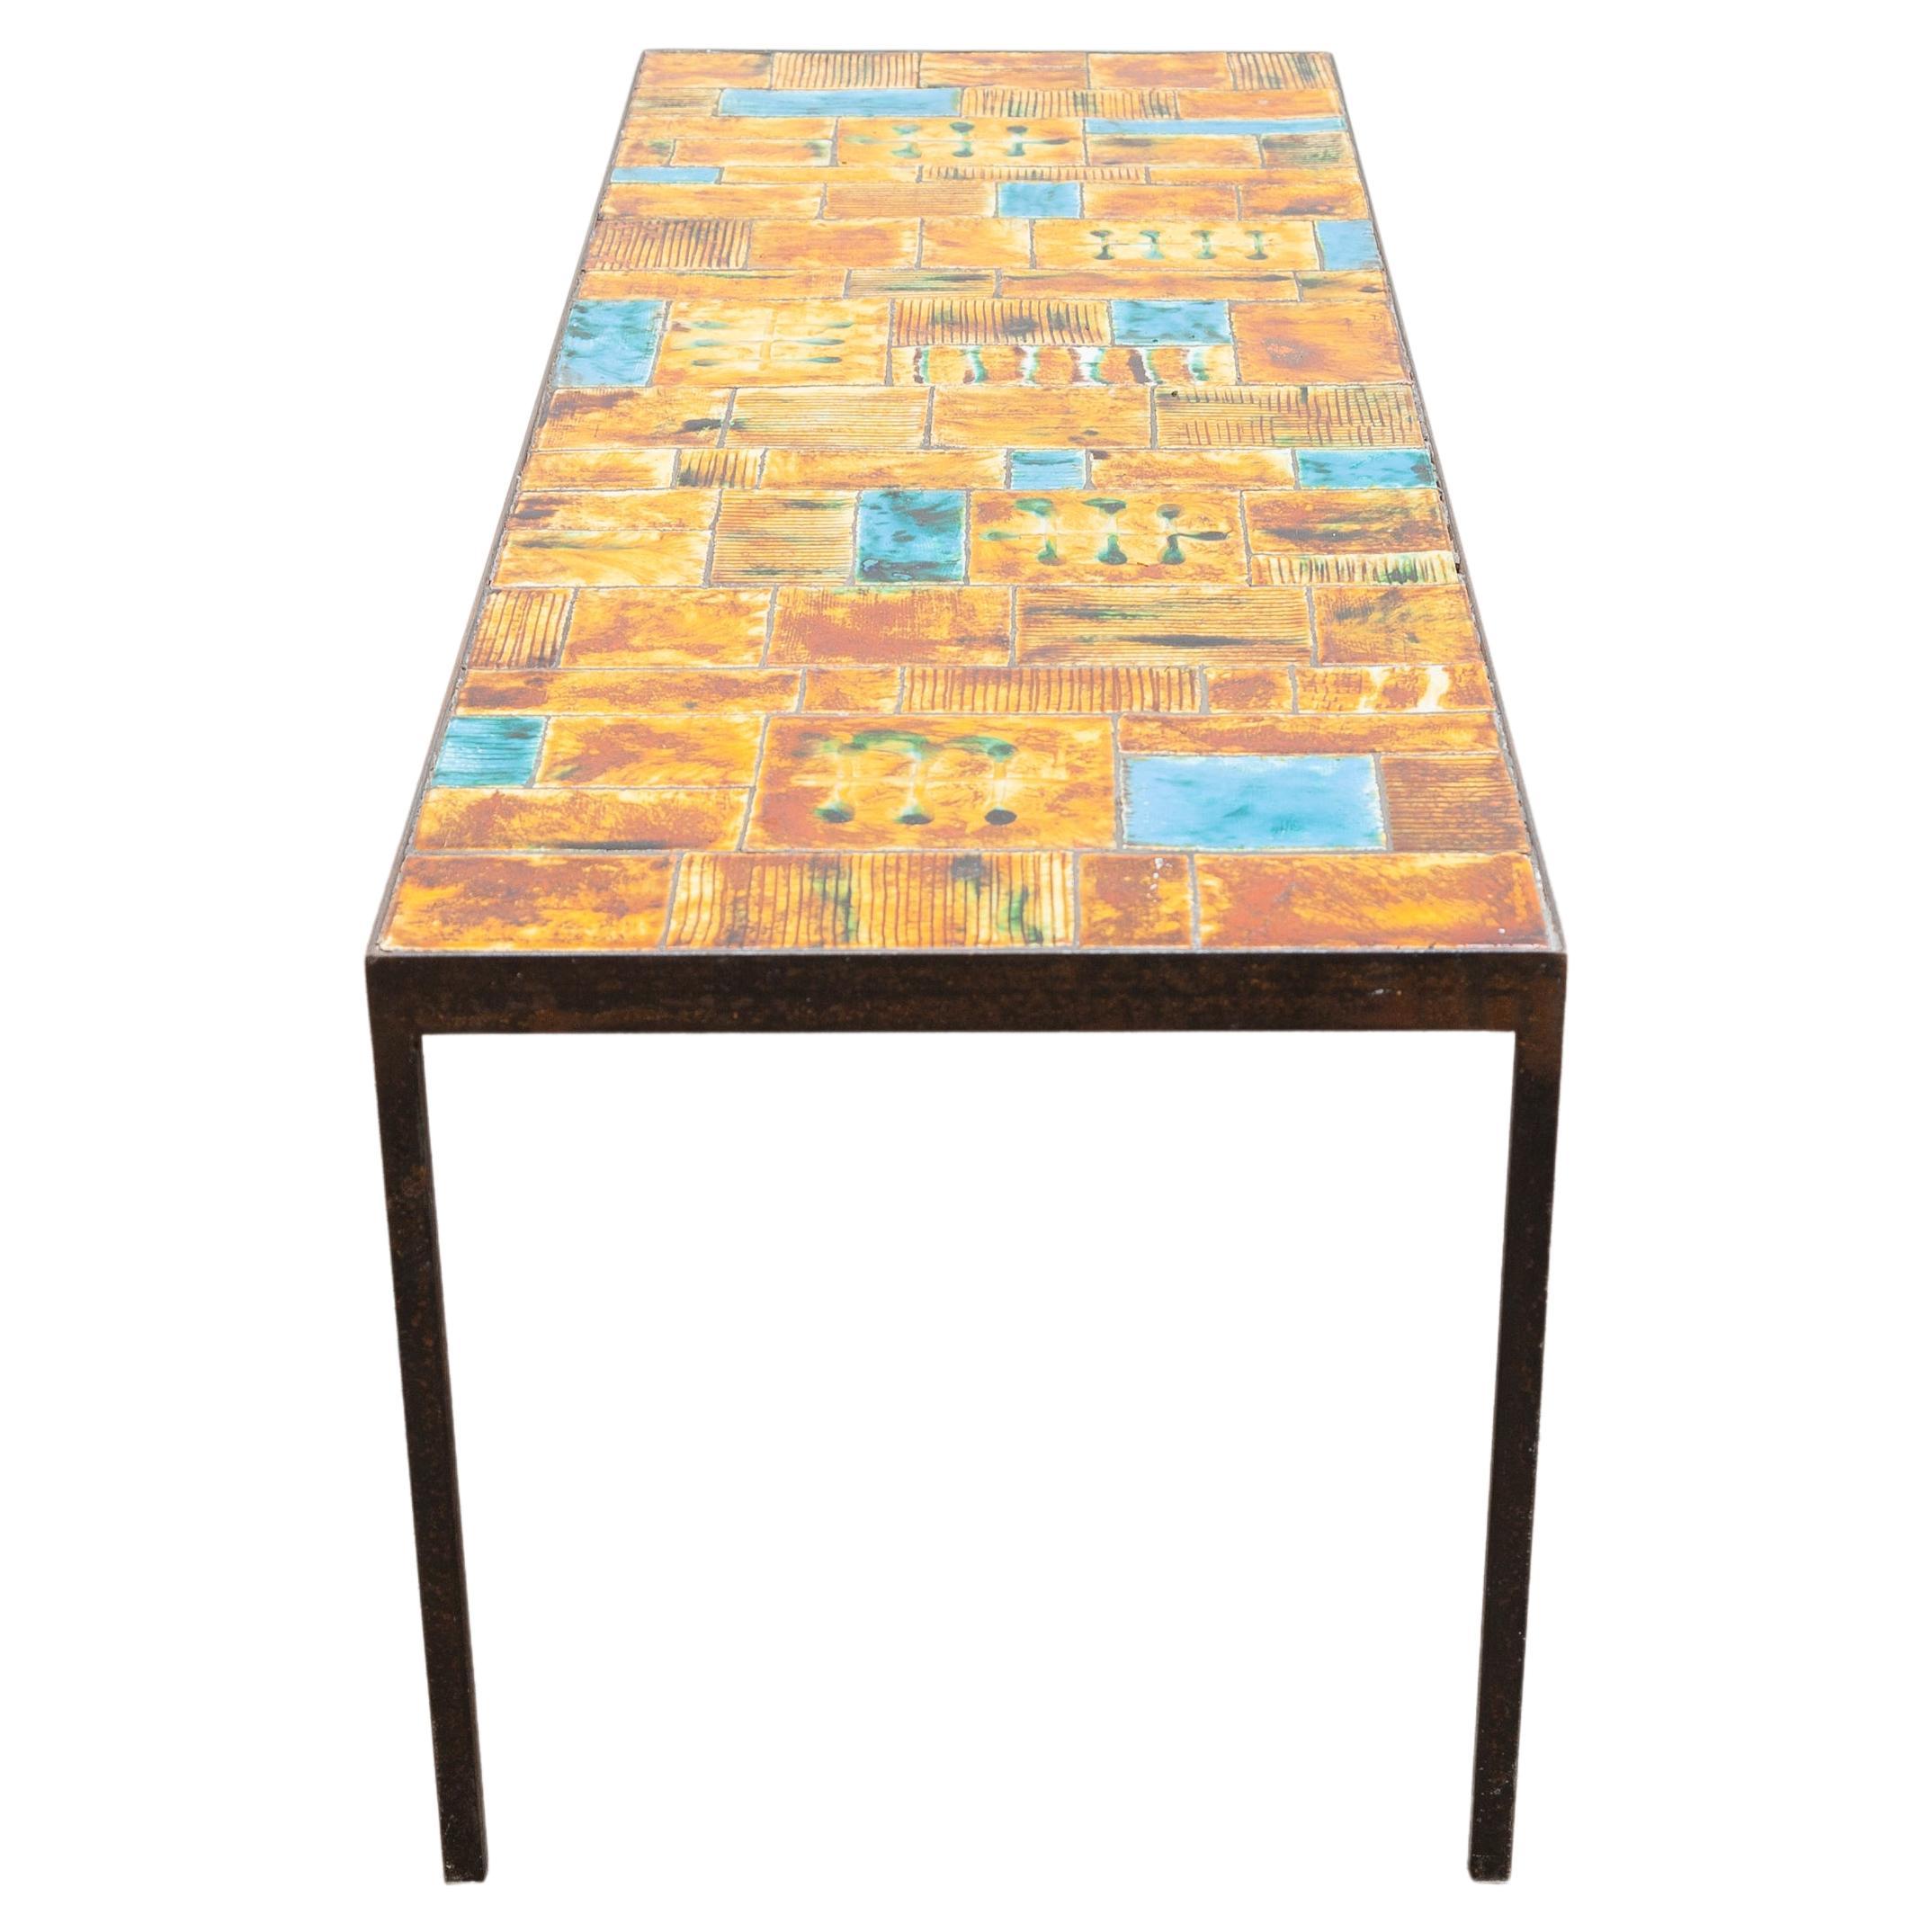 Large Rectangular Tile Coffee Table Designed by Vallauris, France, 1960s For Sale